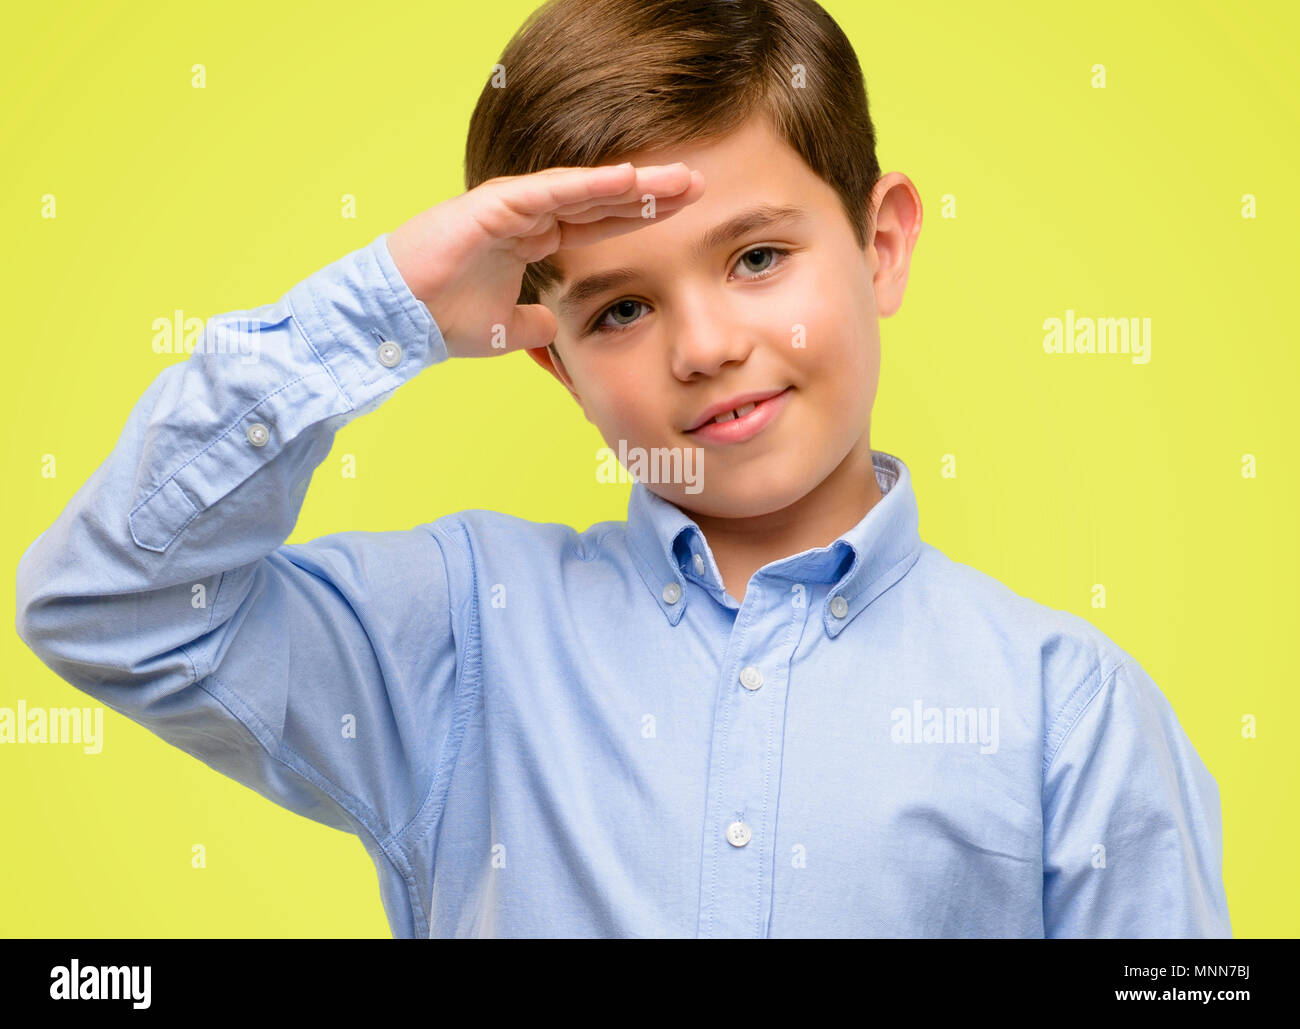 Handsome toddler child with green eyes holding something, size concept over yellow background Stock Photo